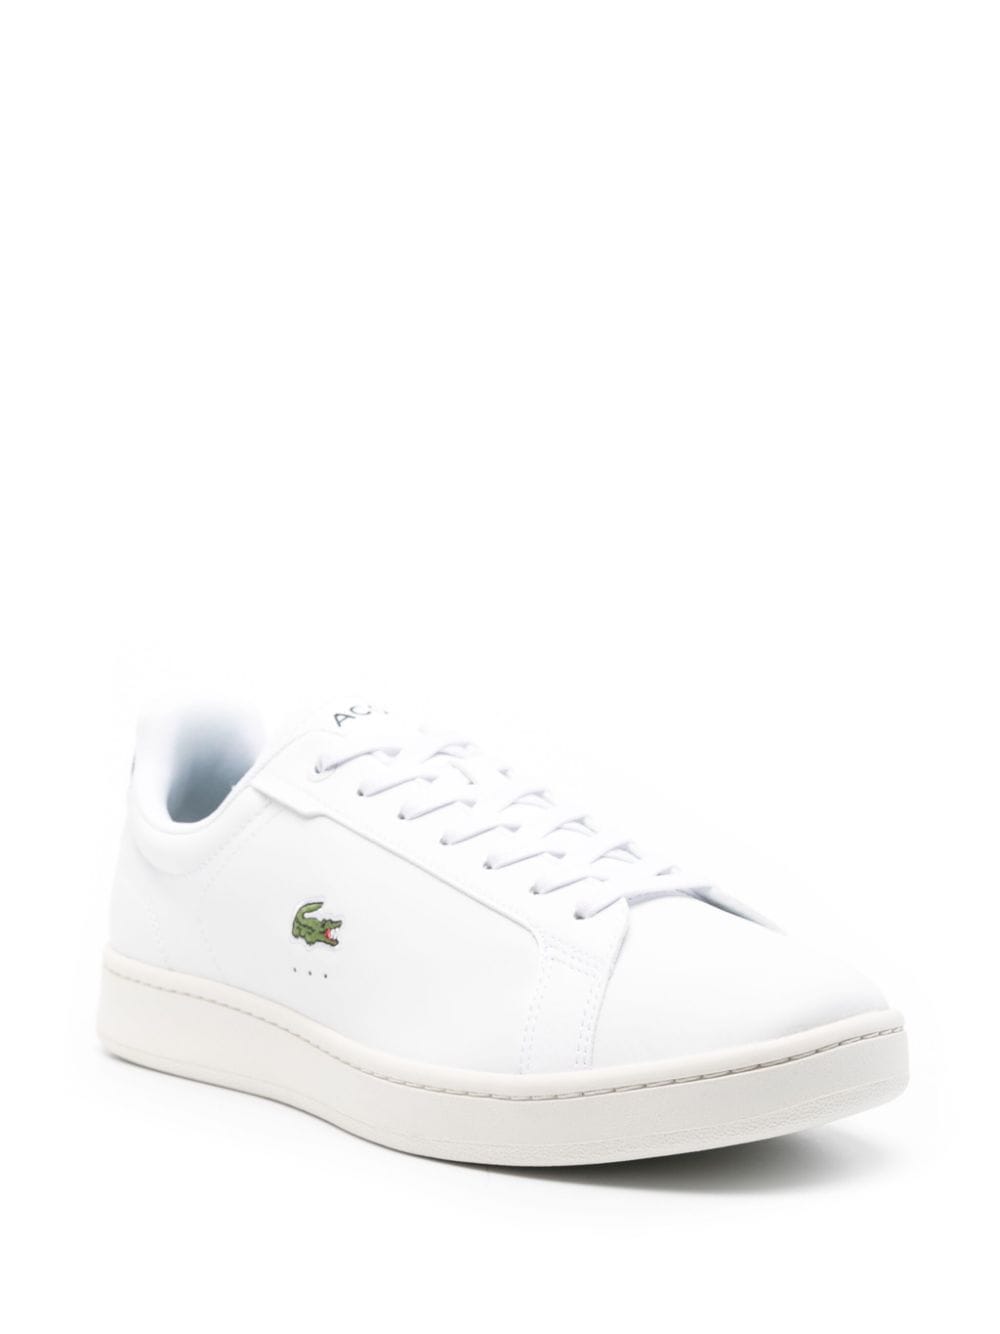 Carnaby Pro Premium leather sneakers<BR/>